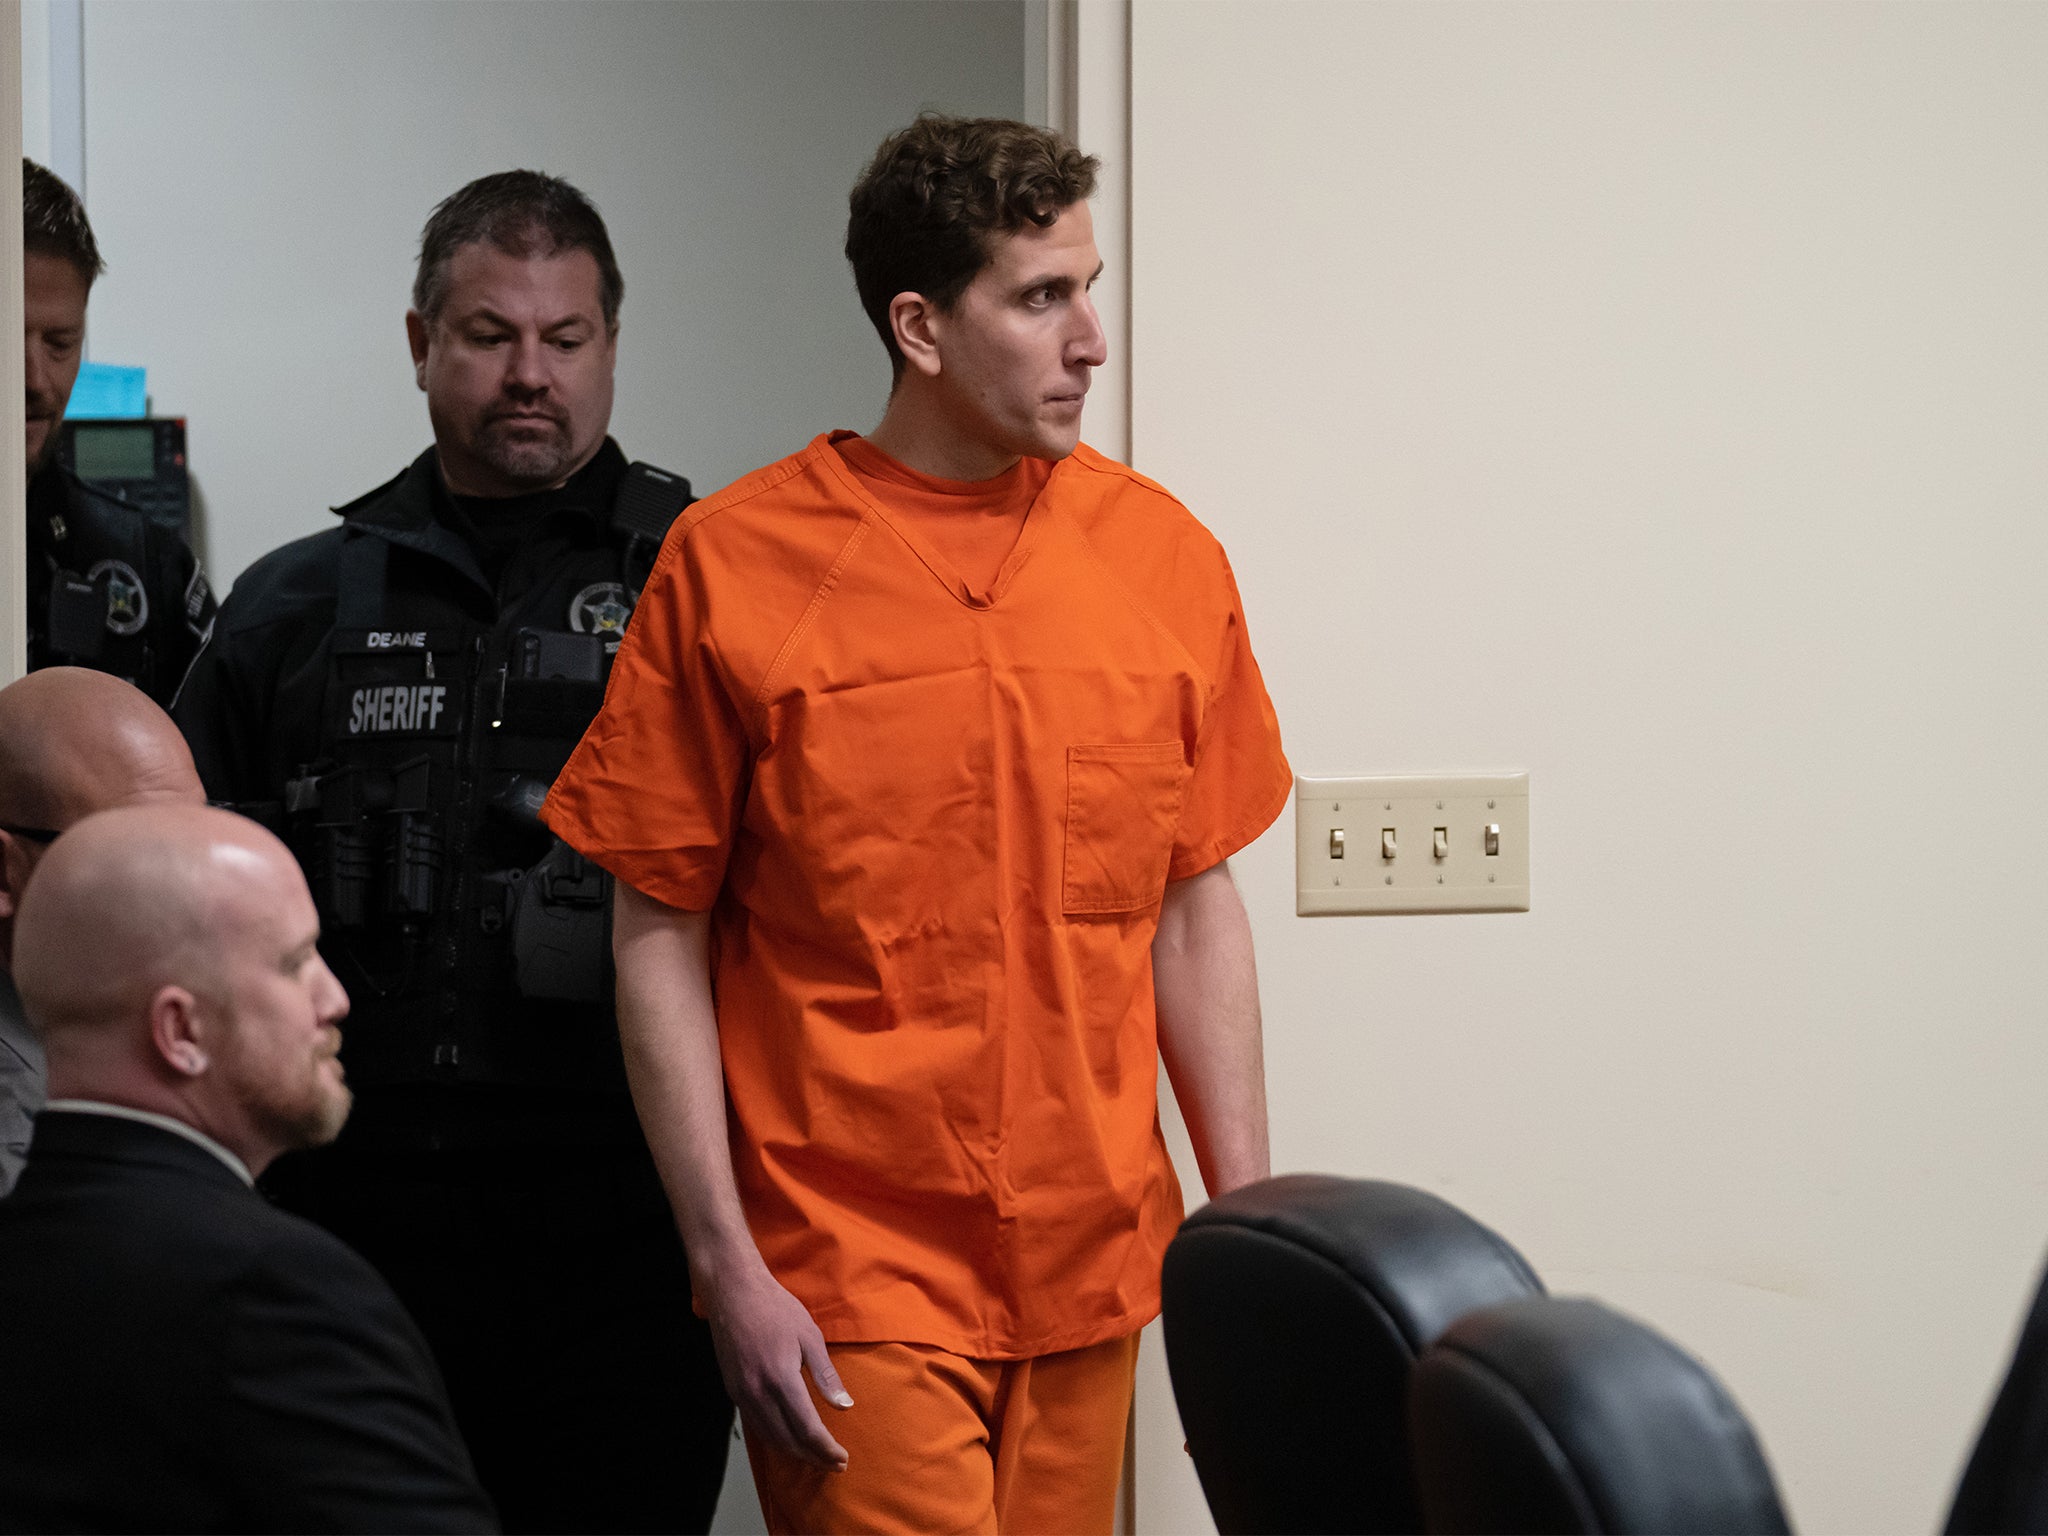 In Kohberger’s first appearance at Latah County District Court in January, he was seen wearing an orange jail jumpsuit